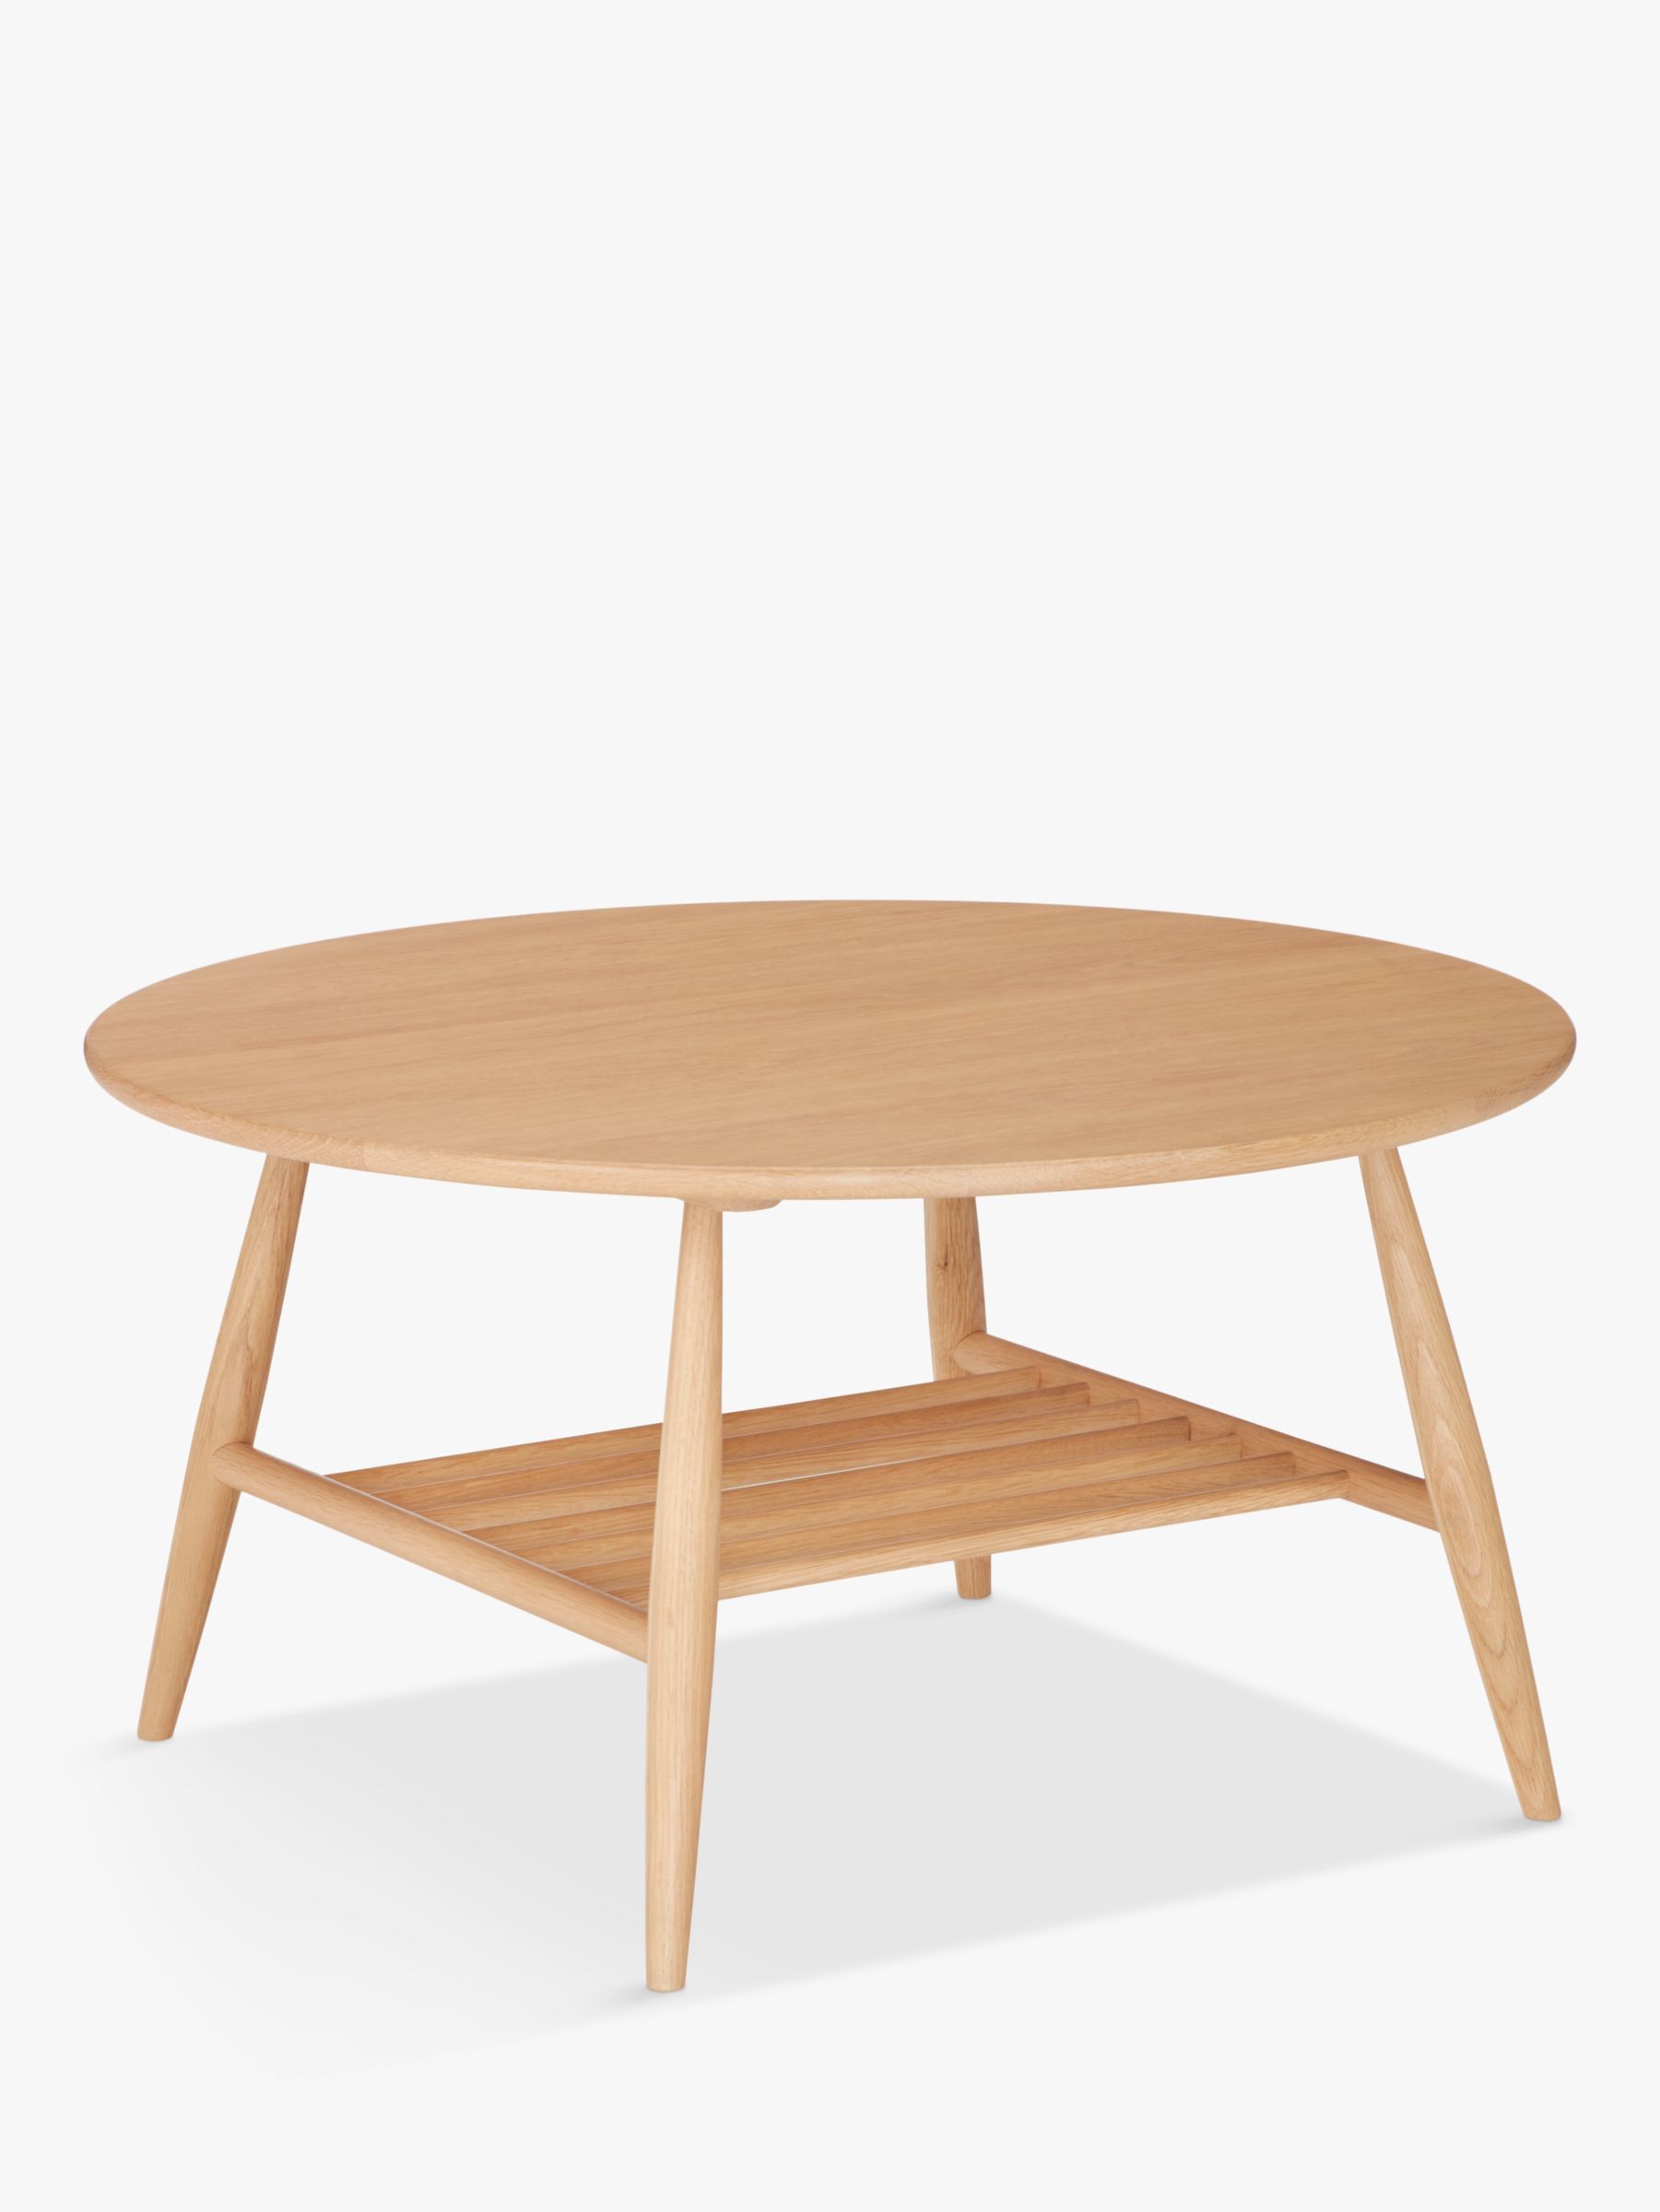 ercol for John Lewis Shalstone Coffee Table at John Lewis & Partners